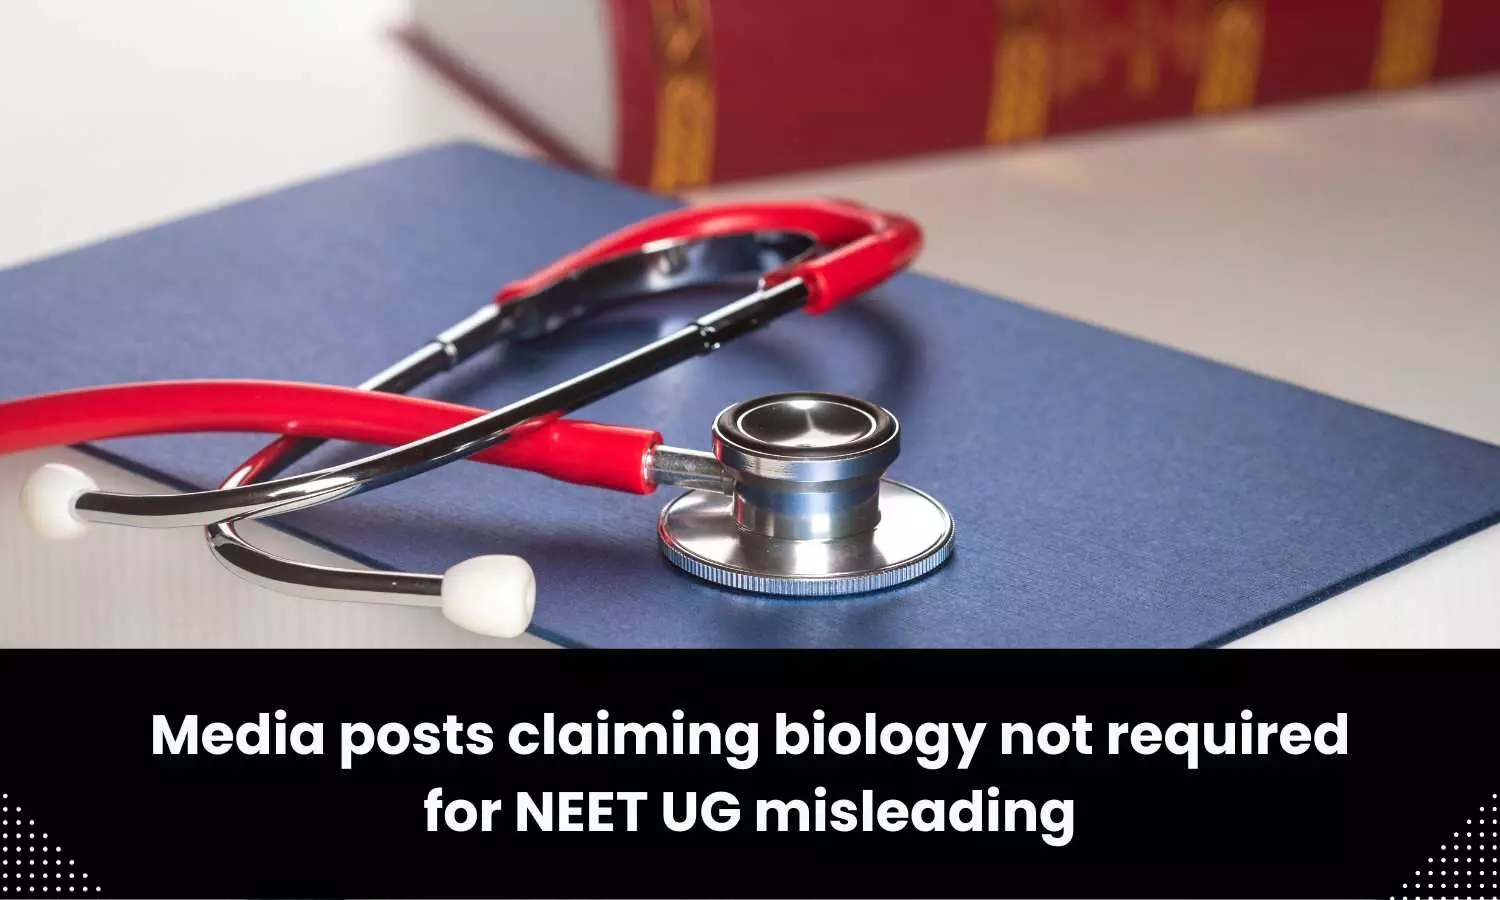 Fact Check: Social media posts claiming biology not required for NEET UG misleading